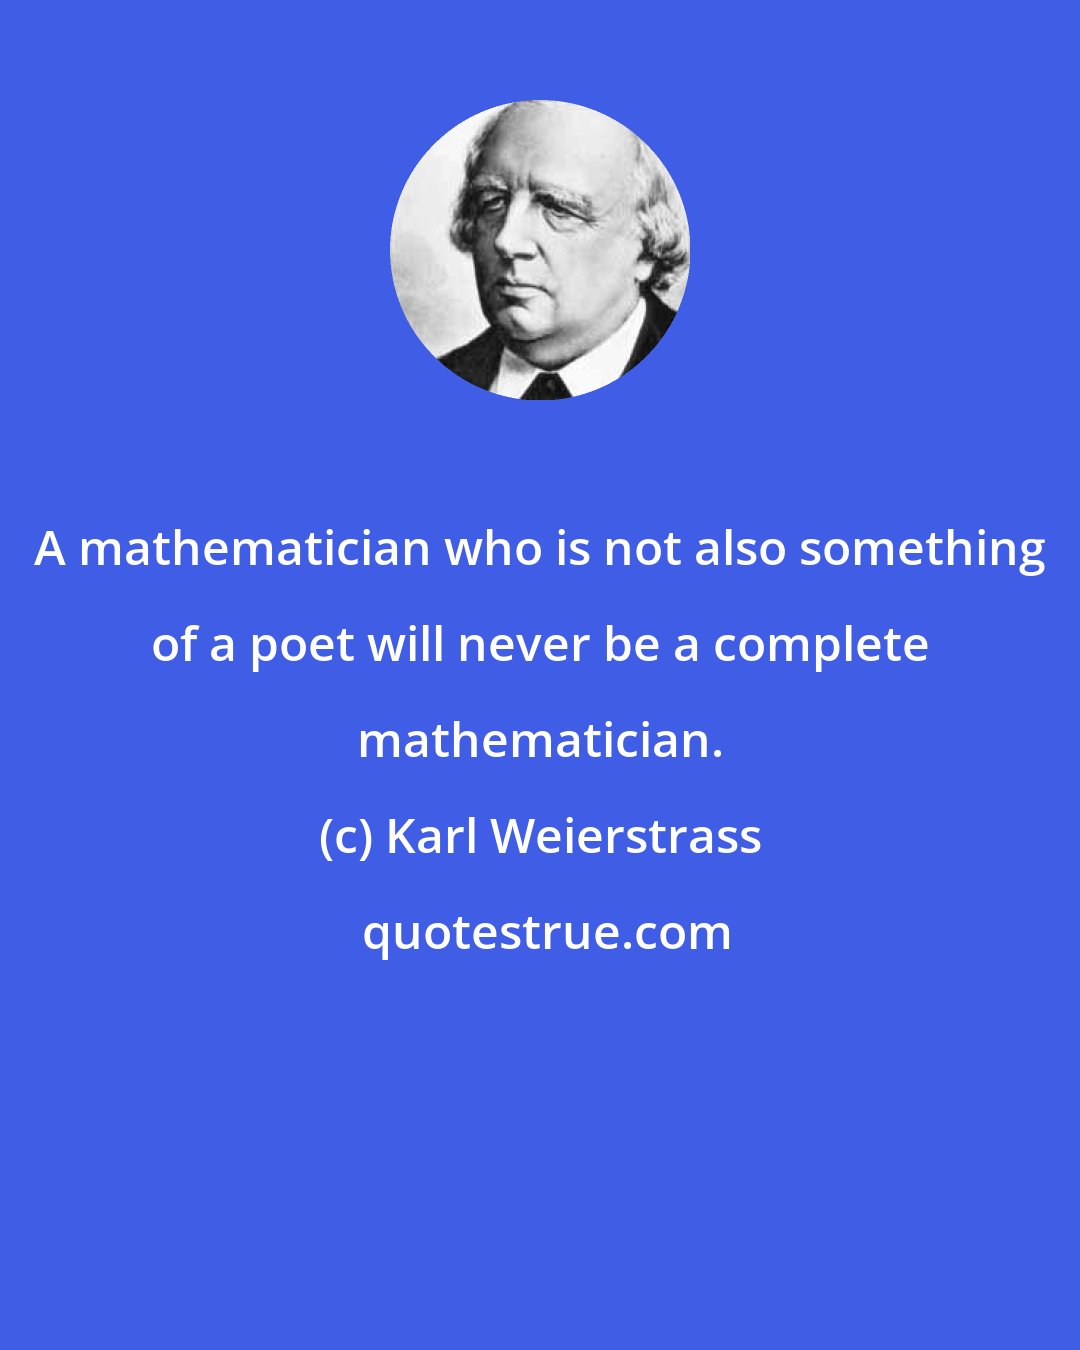 Karl Weierstrass: A mathematician who is not also something of a poet will never be a complete mathematician.